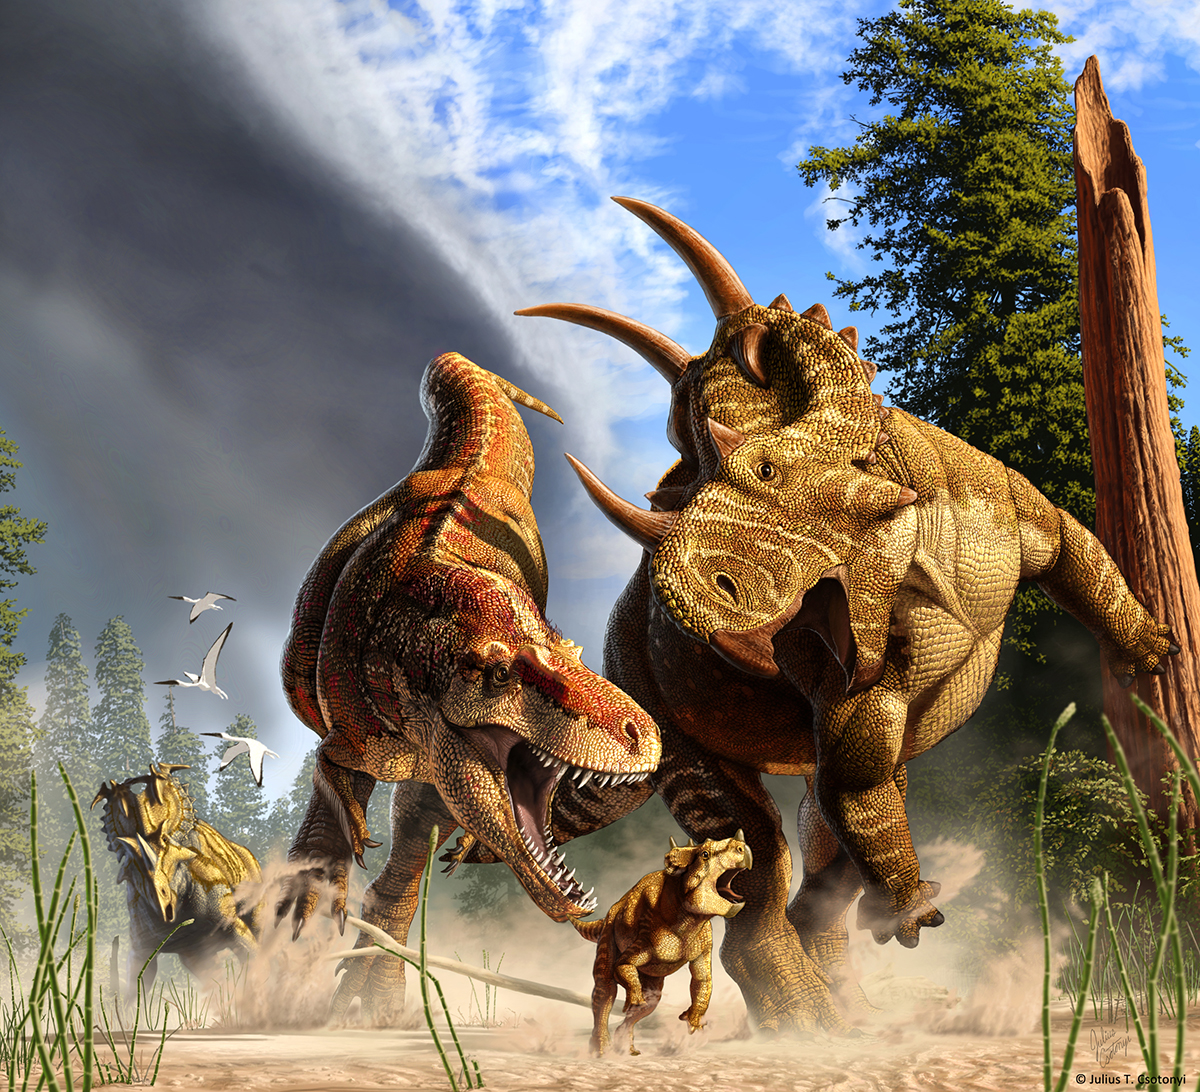 In this artist’s depiction of wildlife from Alberta, Canada, 77 million years ago, the tyrannosaur <i>Daspletosaurus</i> is hunting a young horned <i>Spinops</i>, while an adult <i>Spinops</i> tries to interfere and a different horned dinosaur (Coronosaurus) watches from a distance. Illustration by Julius Csotonyi. Click image to download hi-res version.